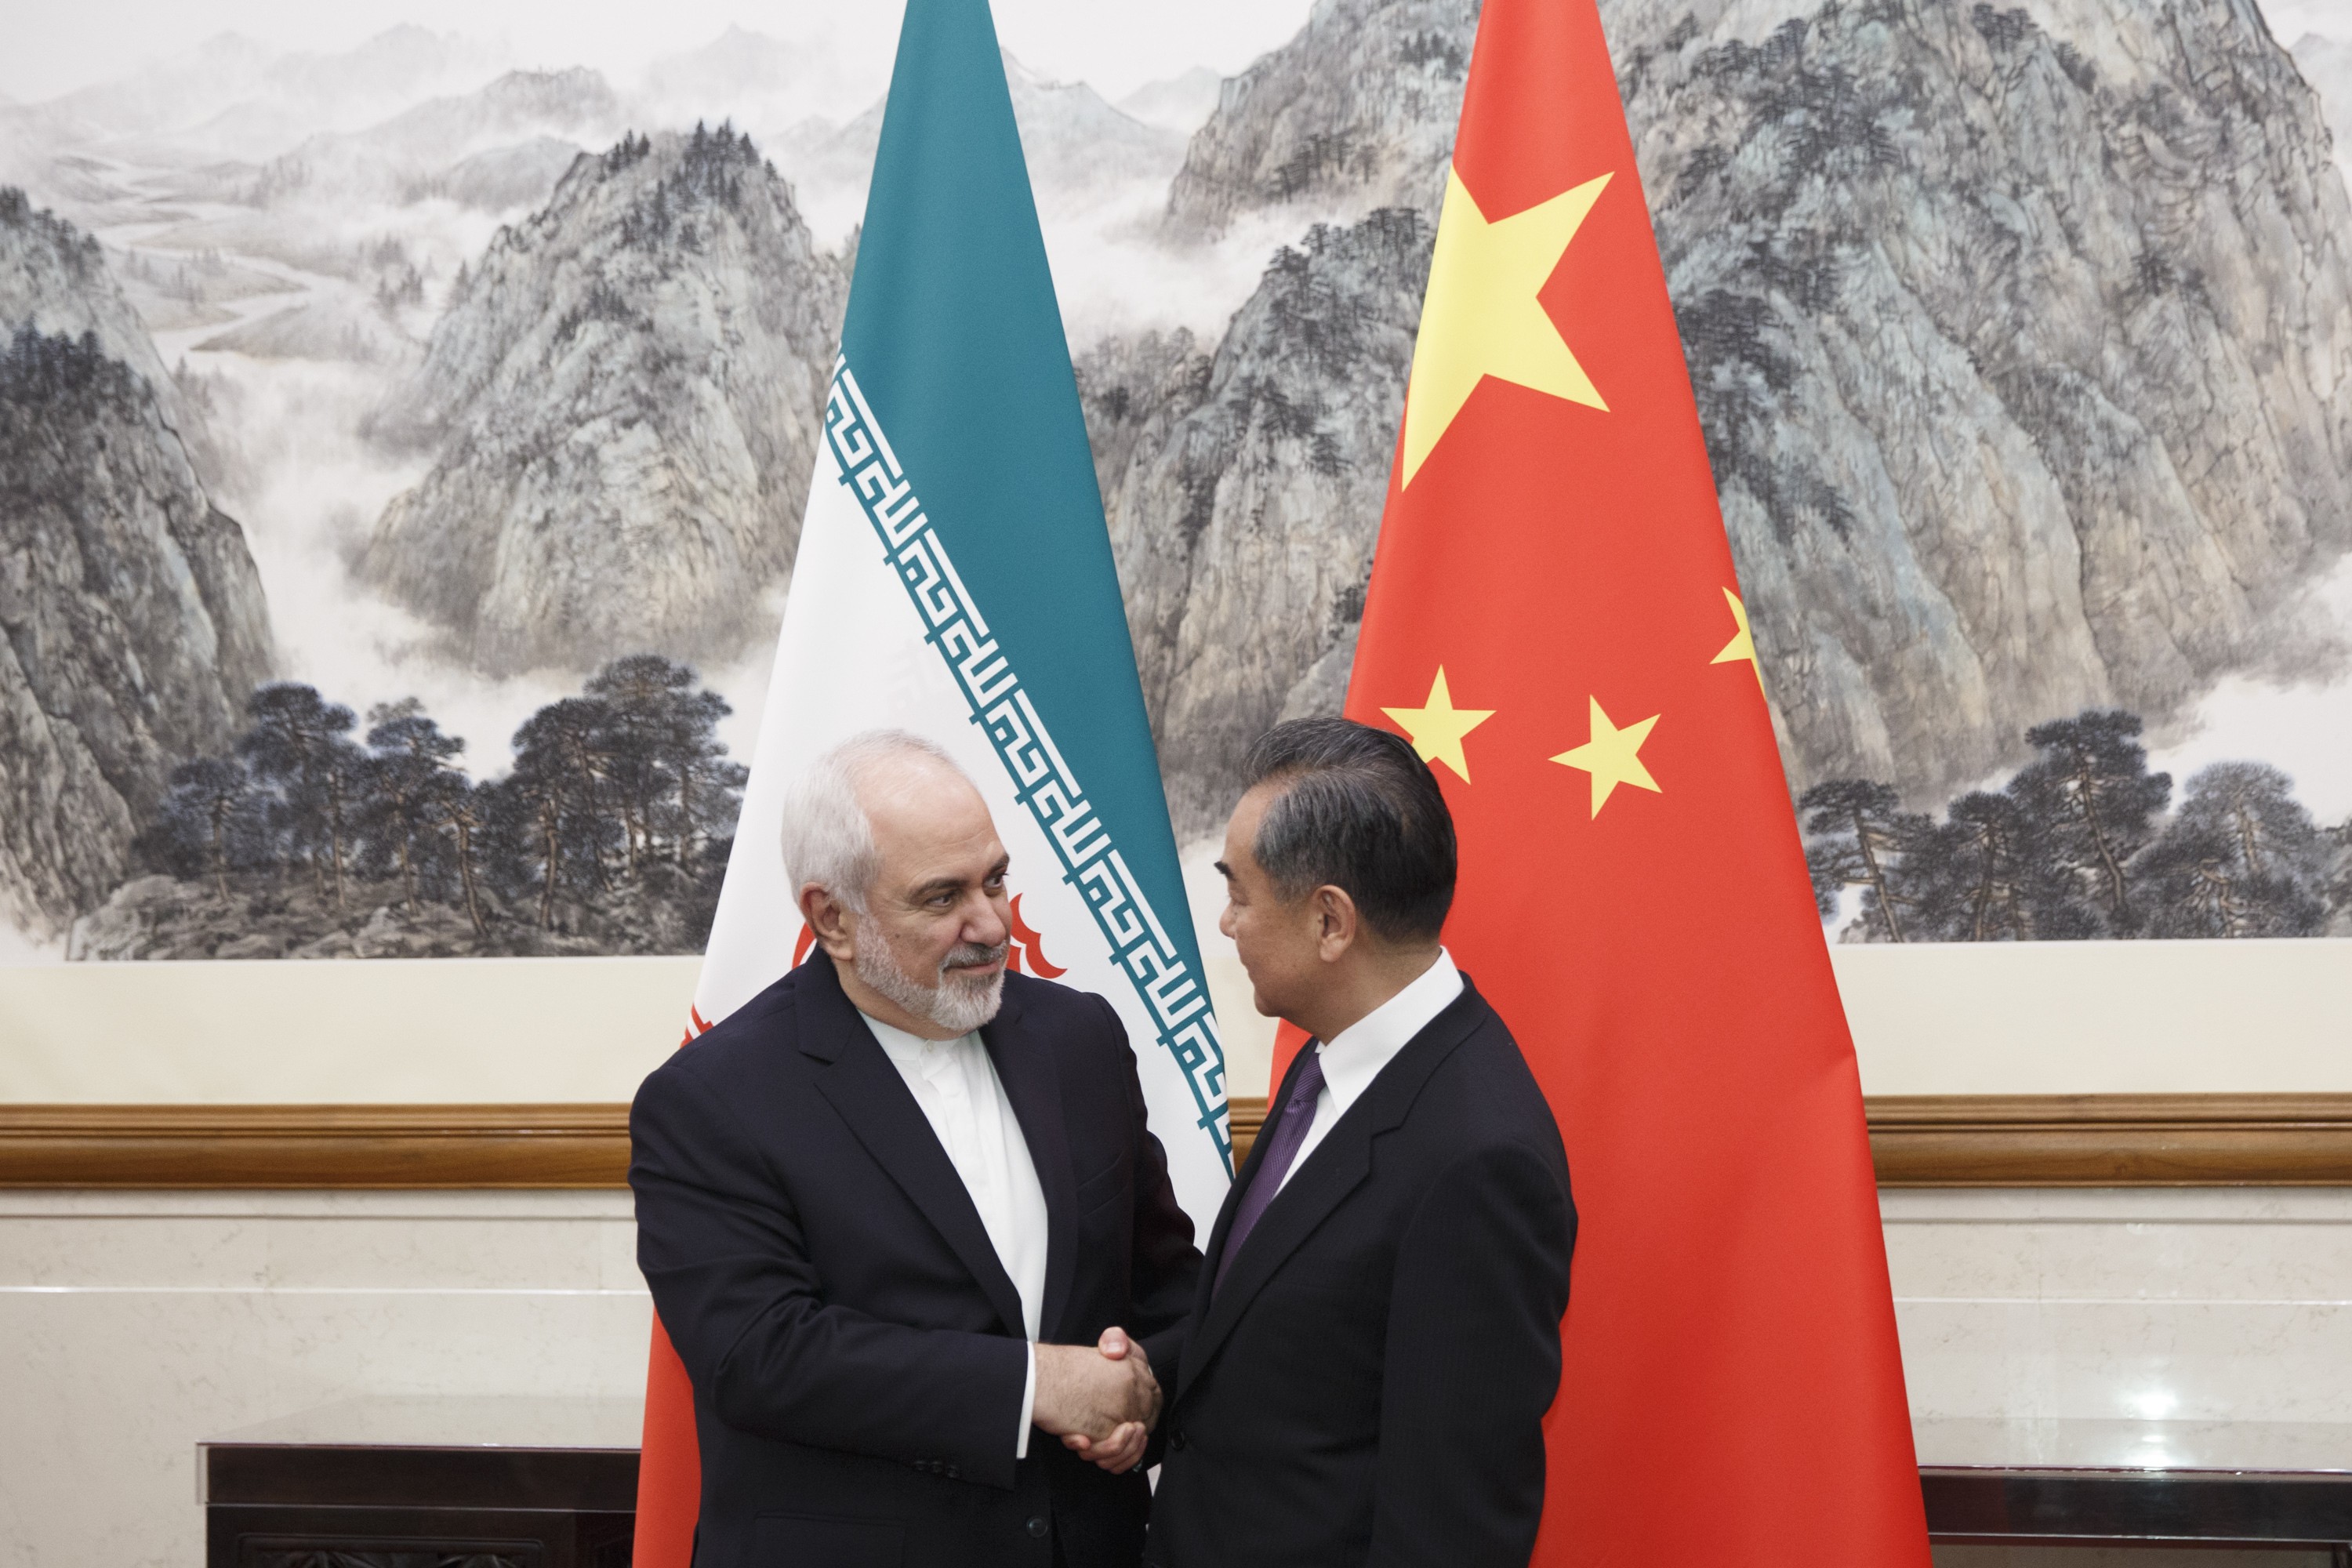 Iranian Foreign Minister Mohammad Javad Zarif meets Chinese Foreign Minister Wang Yi (right) at the Diaoyutai State Guesthouse, in Beijing on May 17. Photo: AP